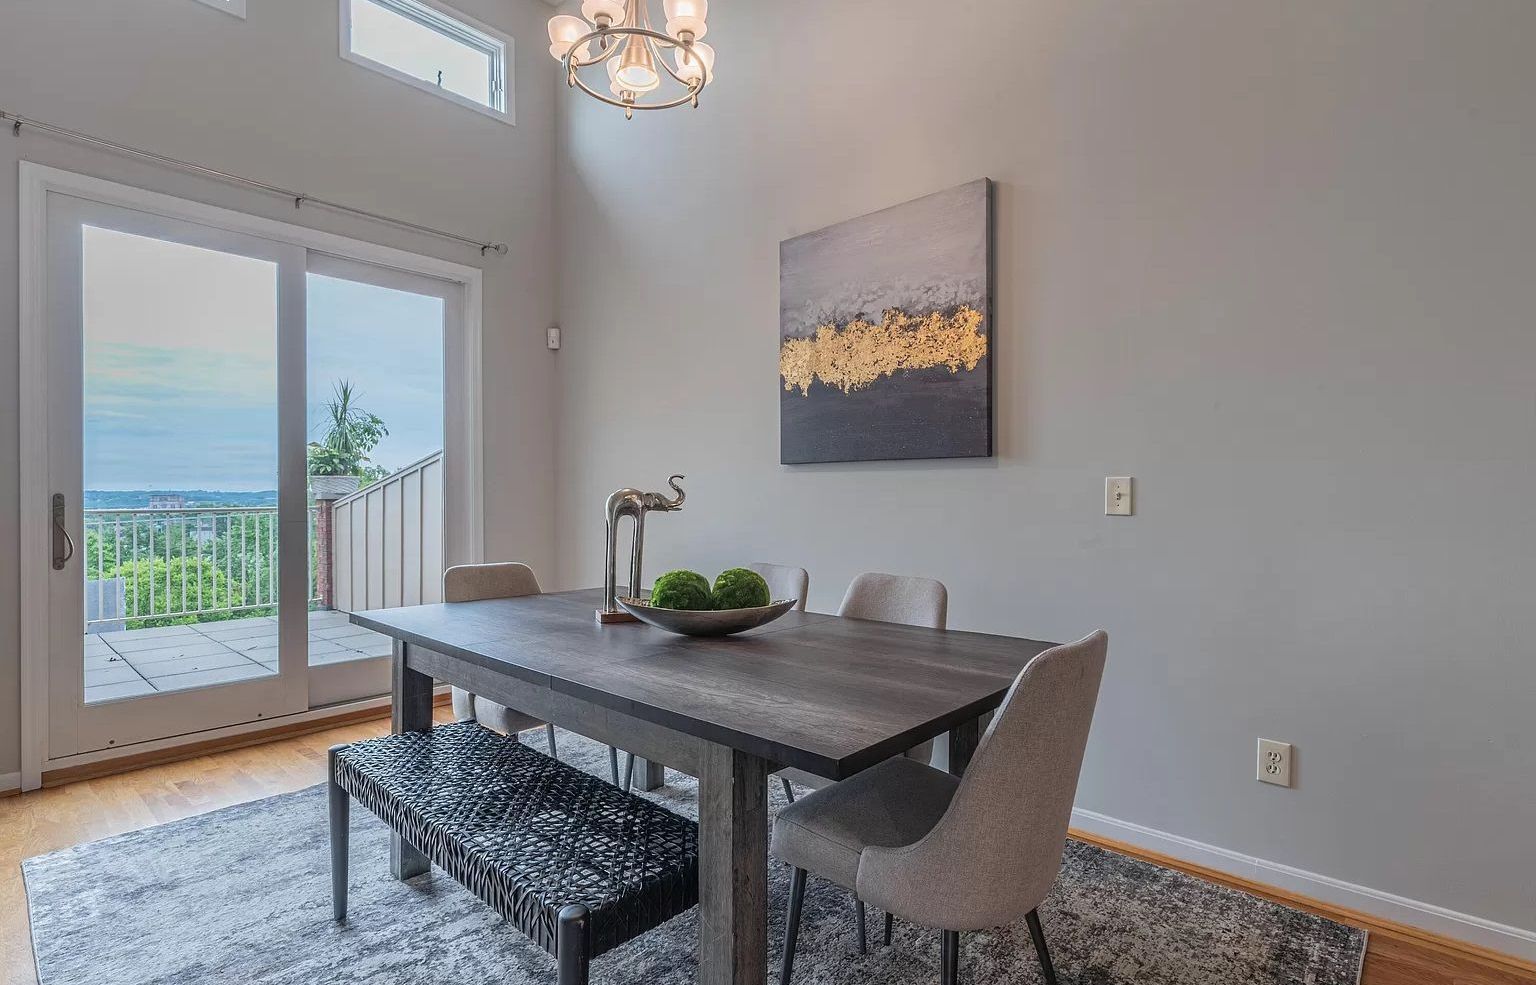 Southgate Townhomes - Dining table